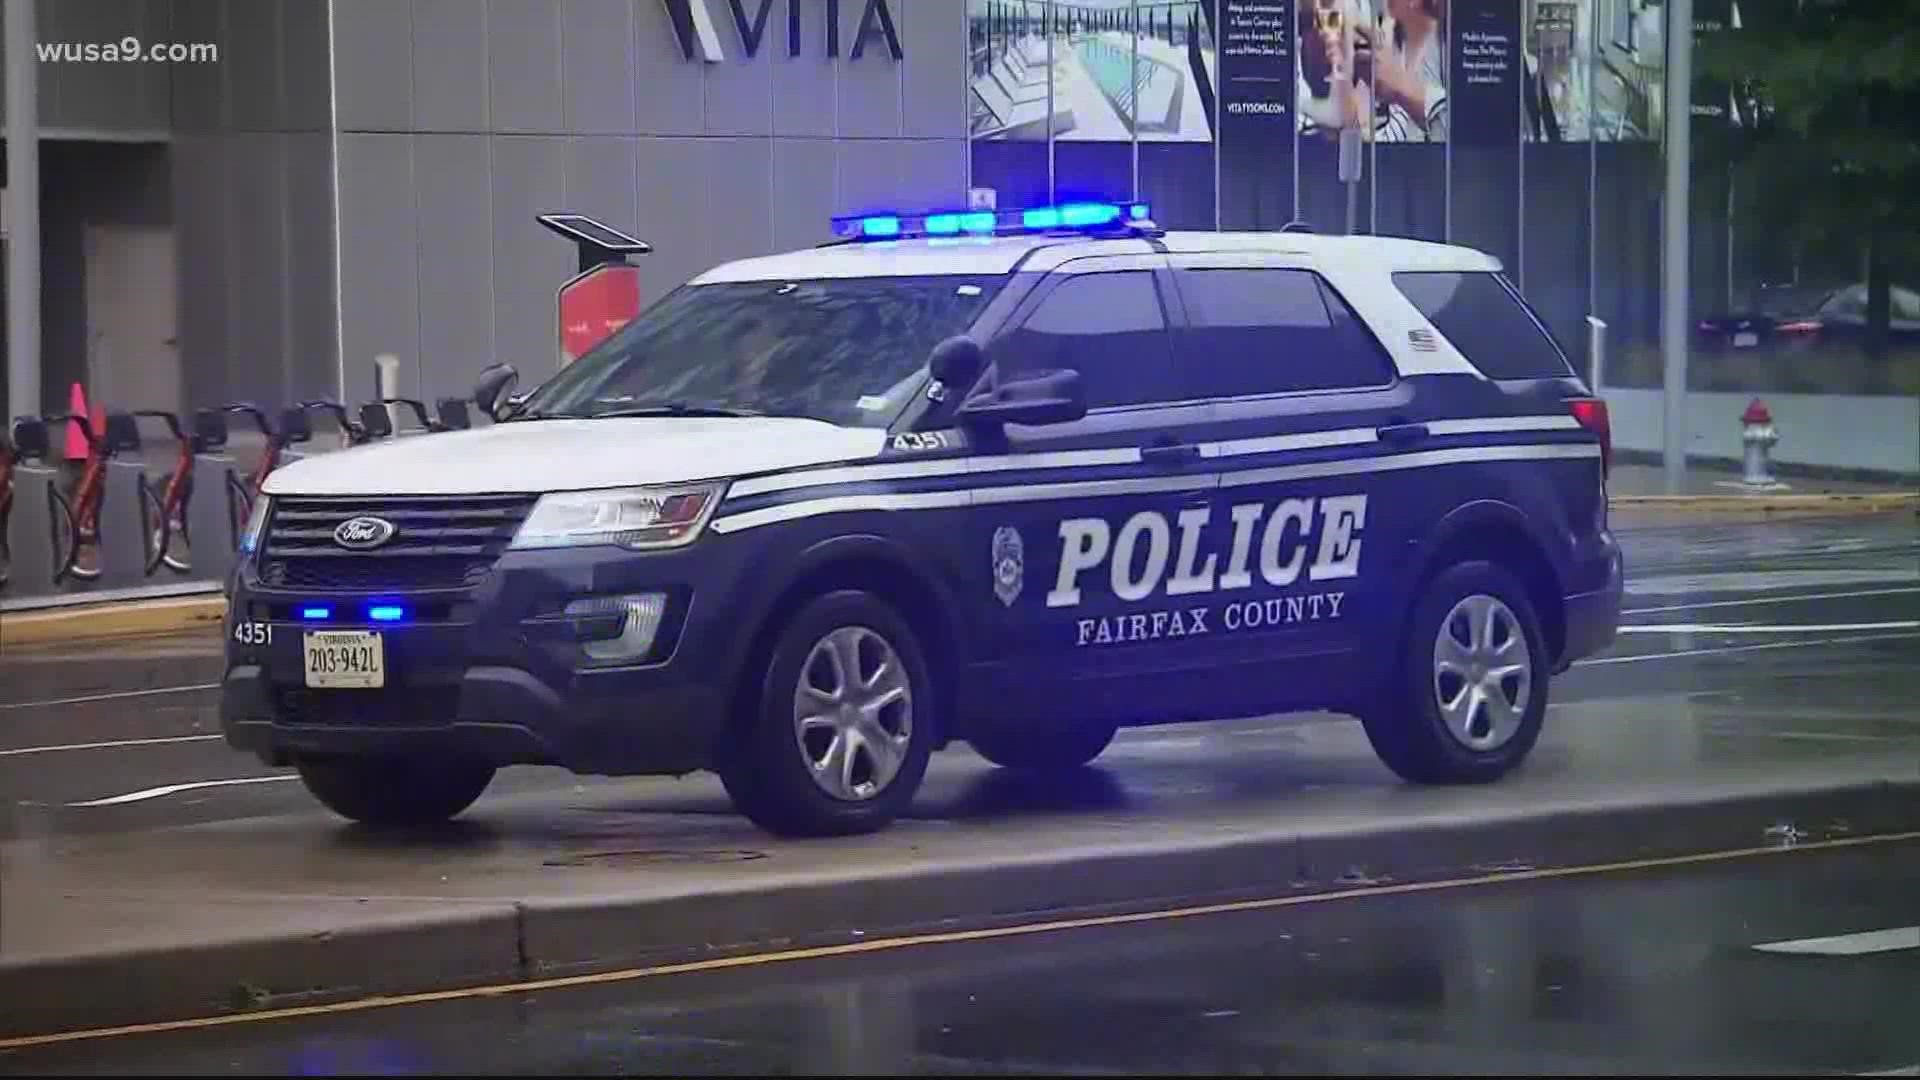 Police around northern Virginia remain on high alert after a threat was made against area malls.